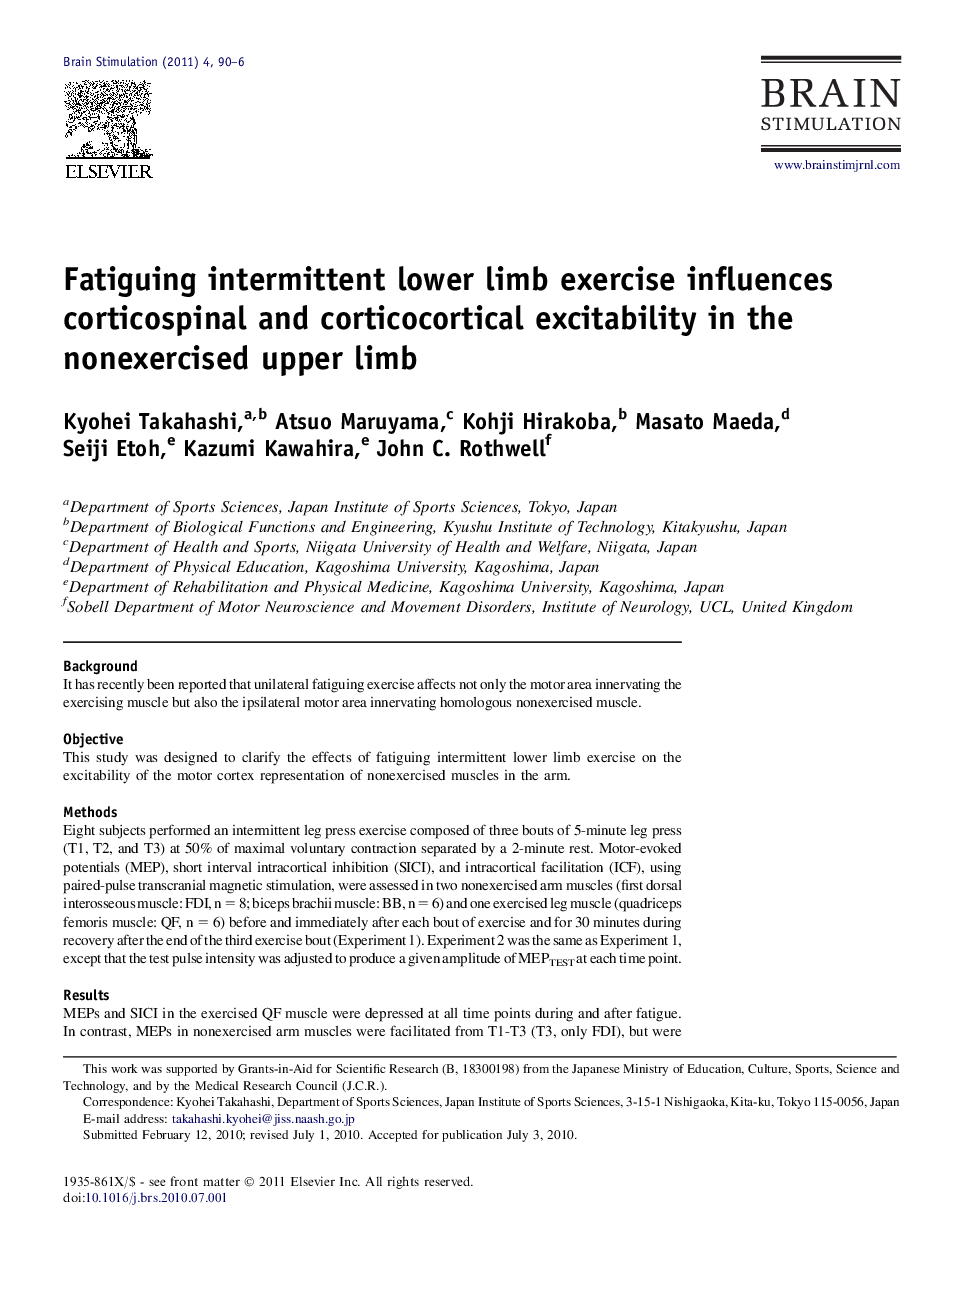 Fatiguing intermittent lower limb exercise influences corticospinal and corticocortical excitability in the nonexercised upper limb 